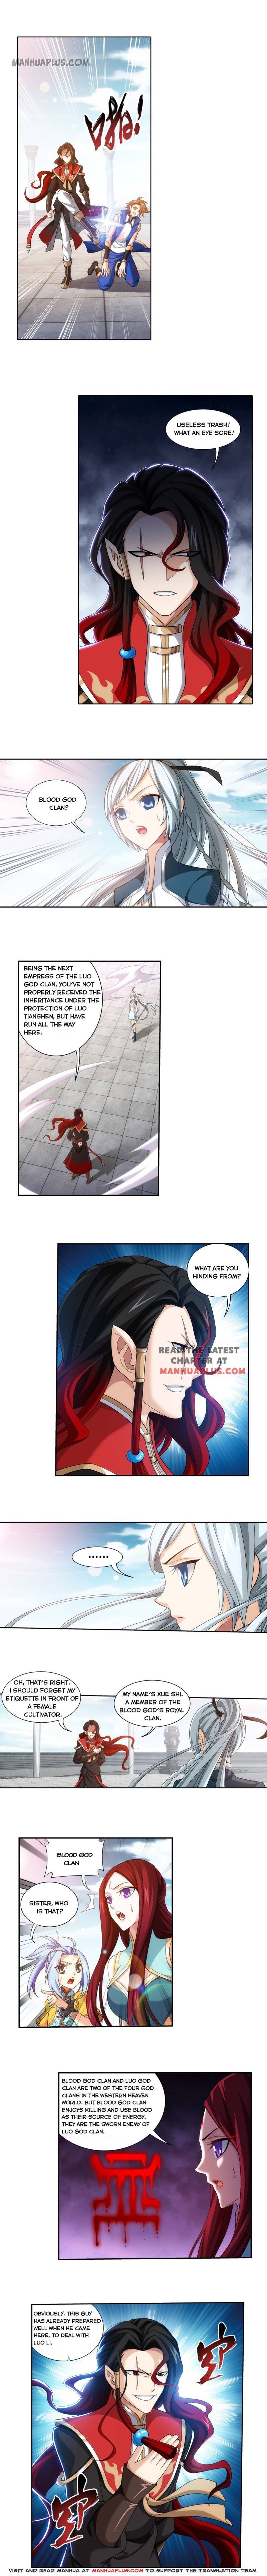 The Great Ruler Chapter 182 page 1